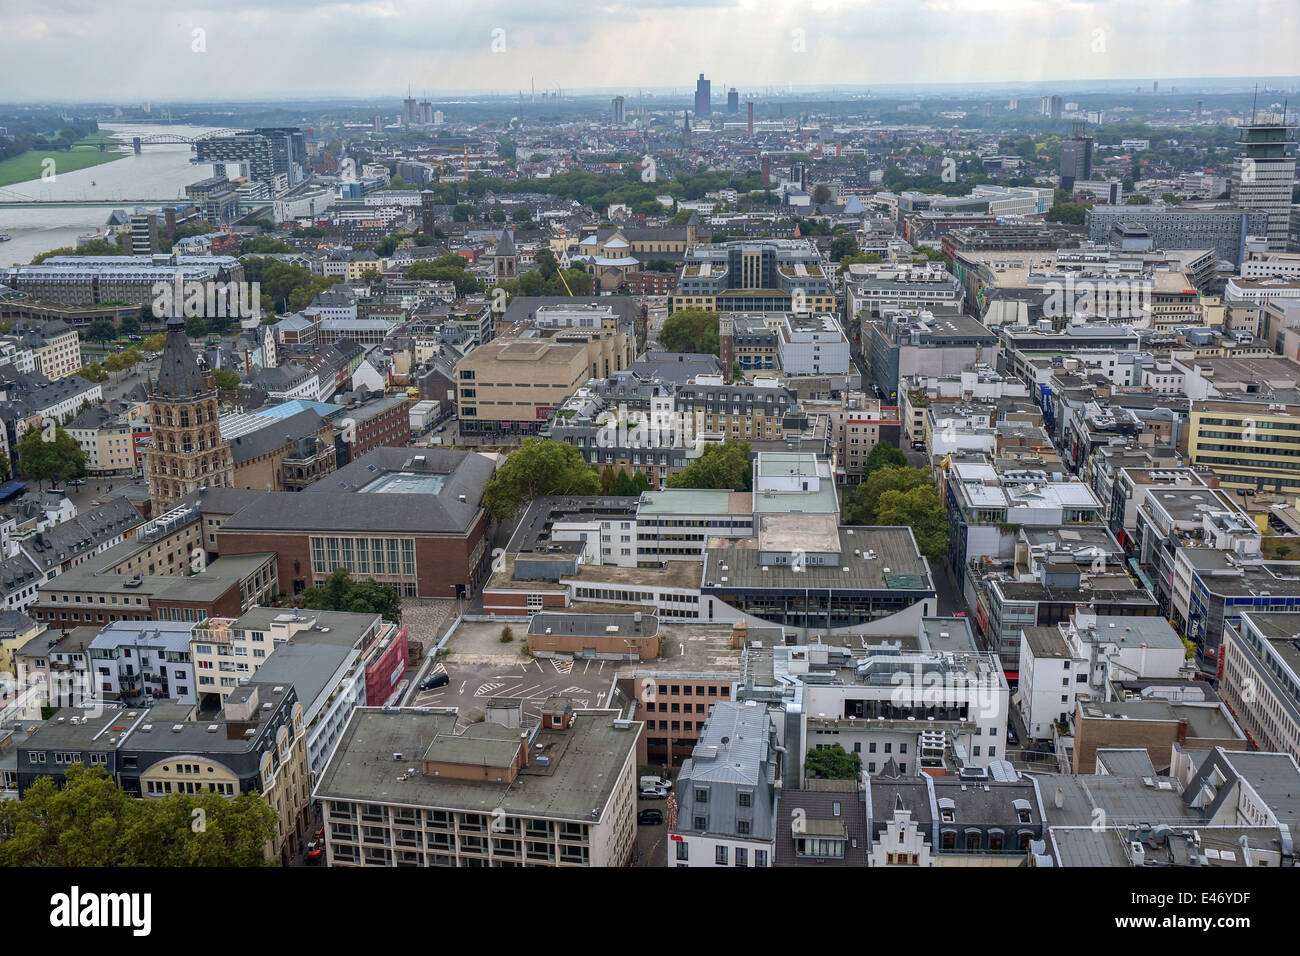 Germany: Cologne City Centre as seen from Cologne Cathedral (Kölner Dom). Photo from 23 September 2013. Stock Photo